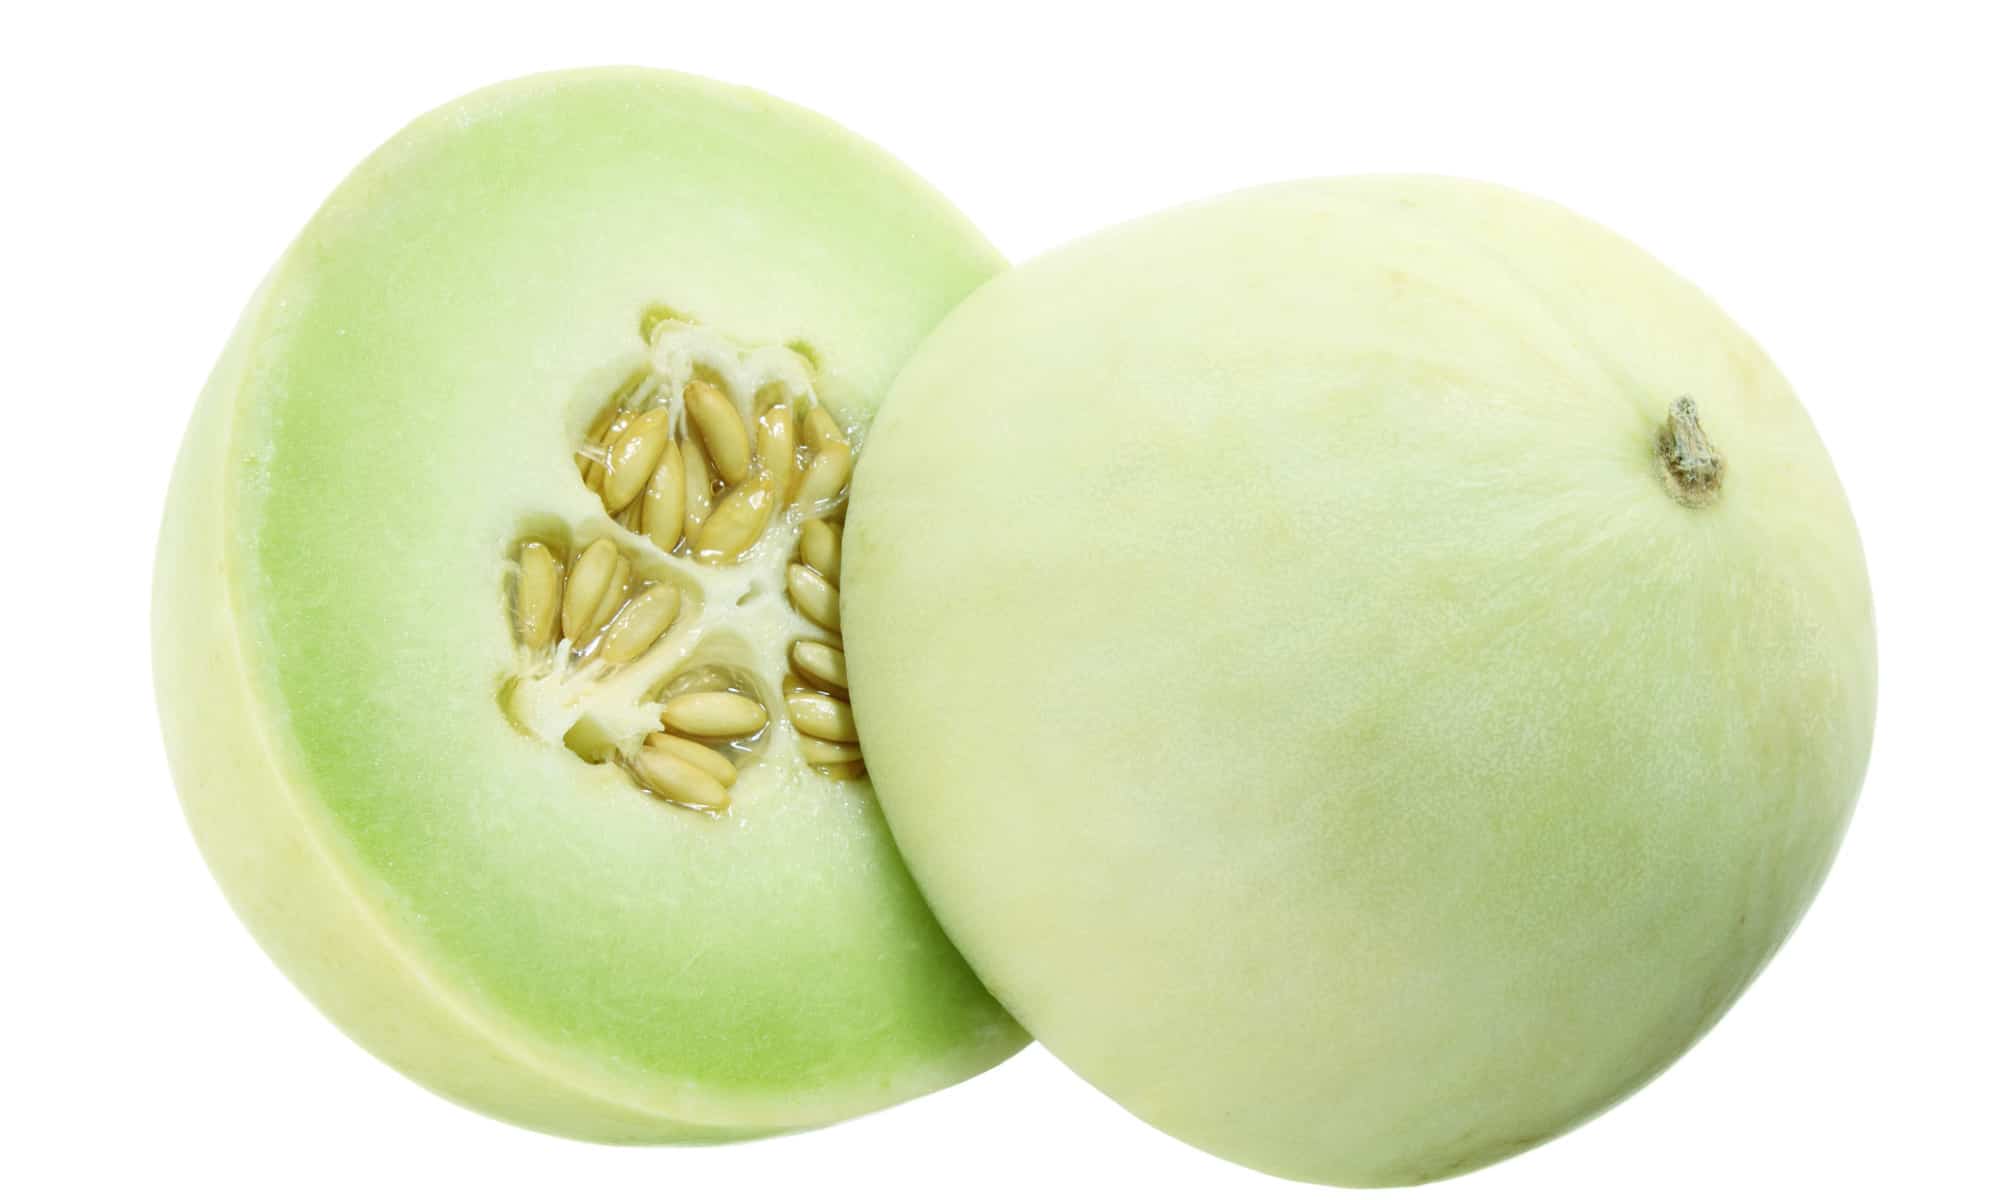 Can Your Dog Eat Honeydew Melon? What About The Rind?